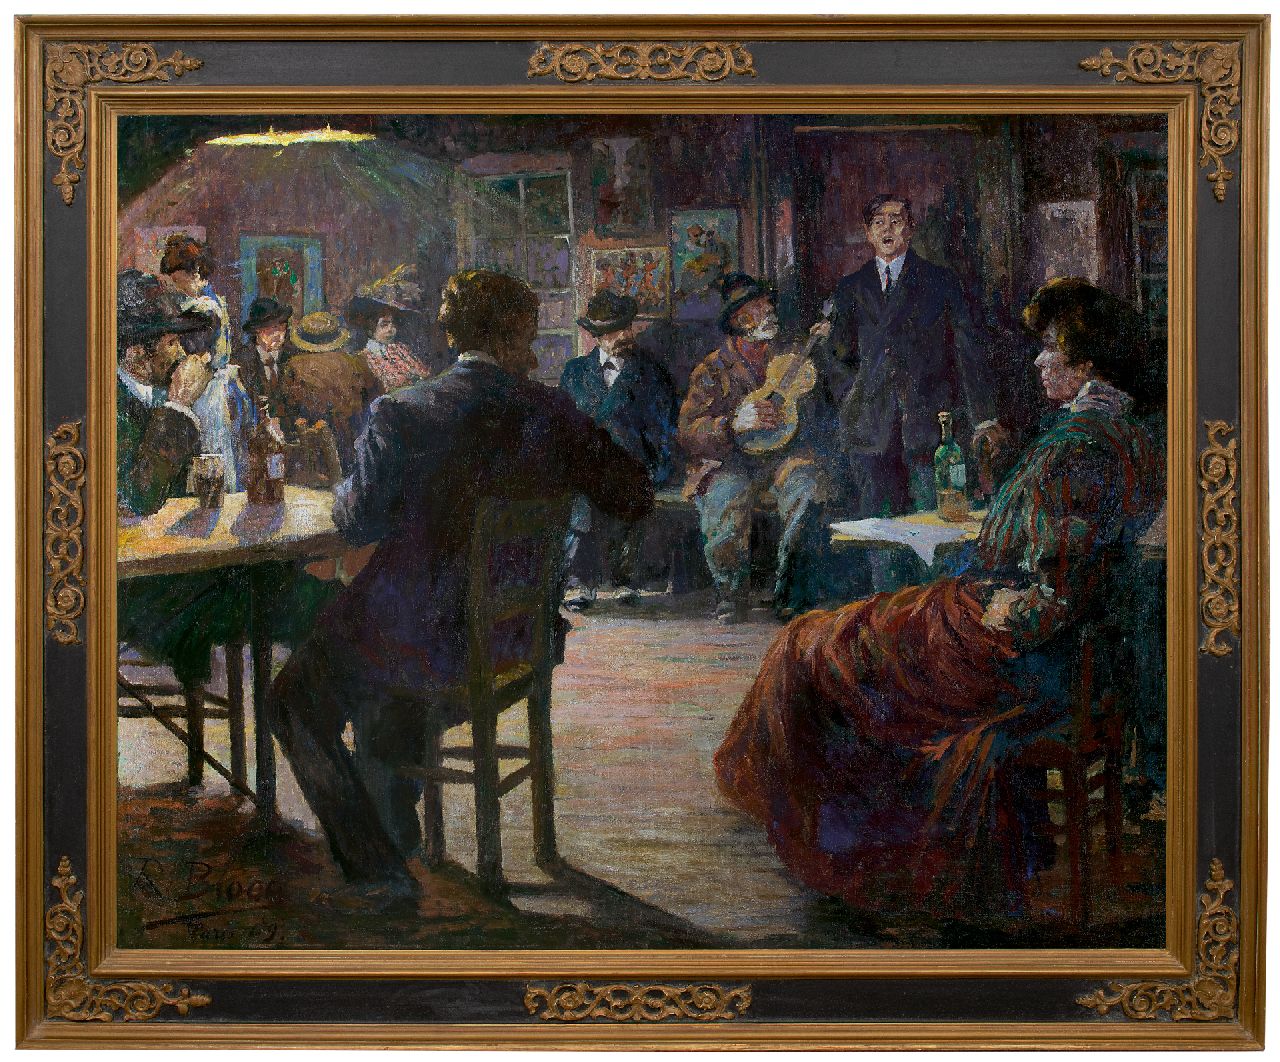 Bloos R.W.  | 'Richard' Willi Bloos | Paintings offered for sale | Café chantant, oil on canvas 132.5 x 165.8 cm, signed l.l. and dated 'Paris' 09